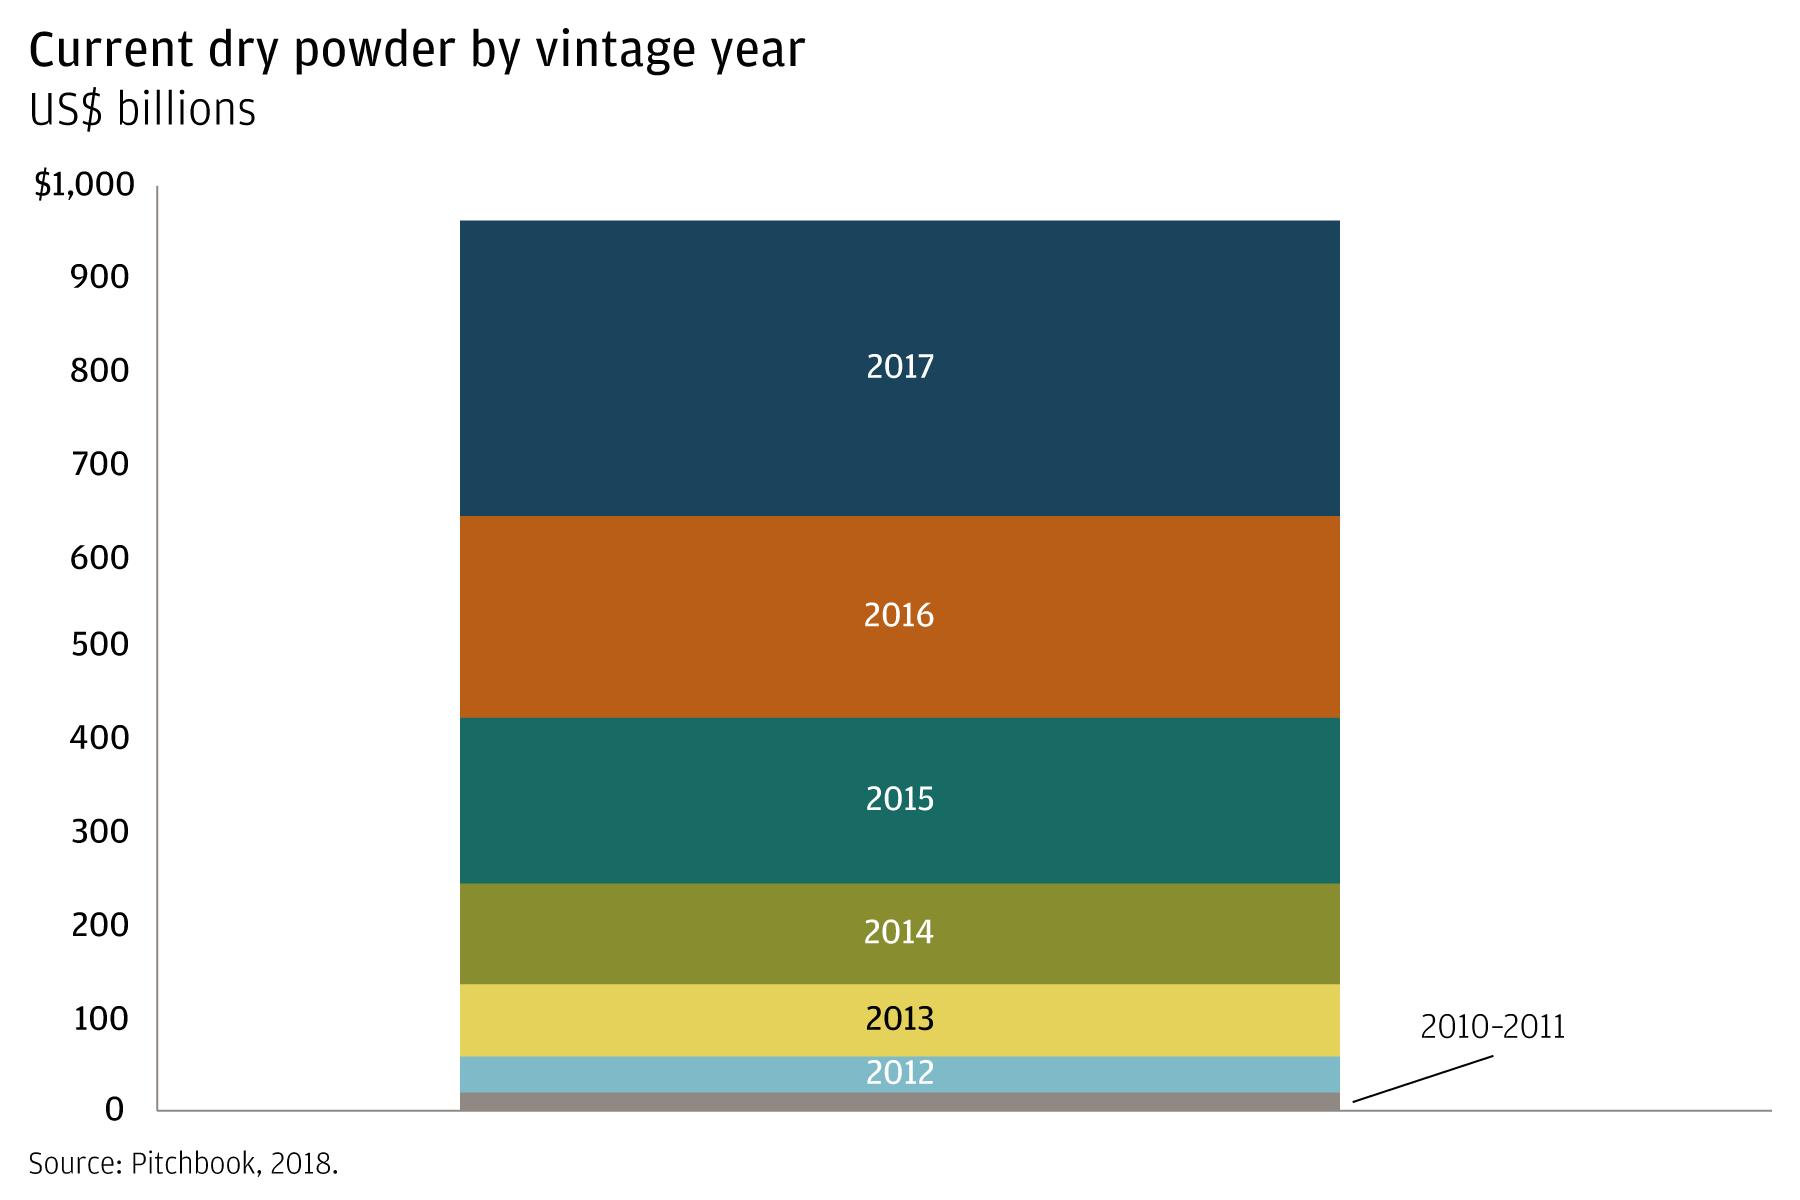 Bar showing the amount of dry powder by funds’ vintage year